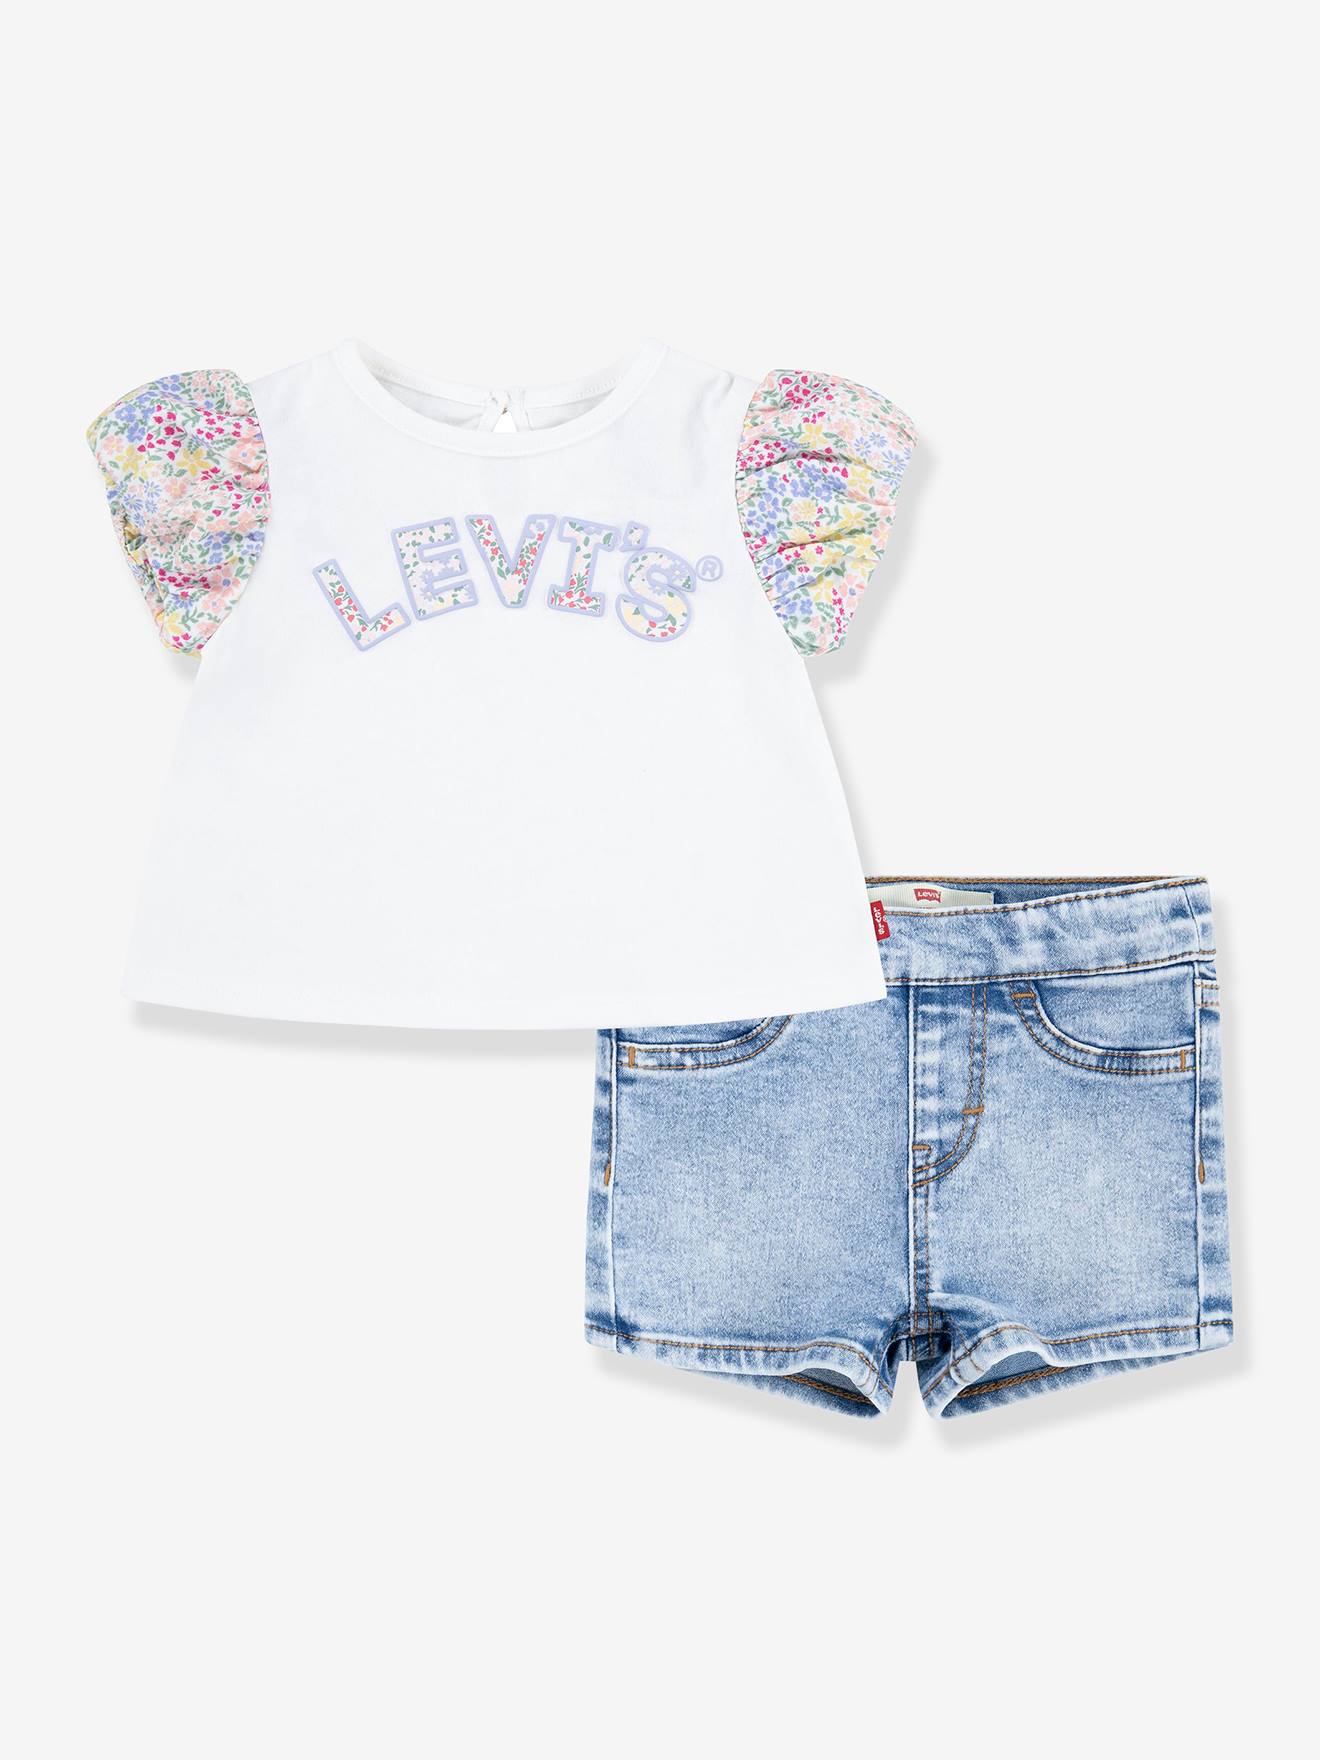 Levi’s(r) Shorts & T-Shirt Combo for Babies